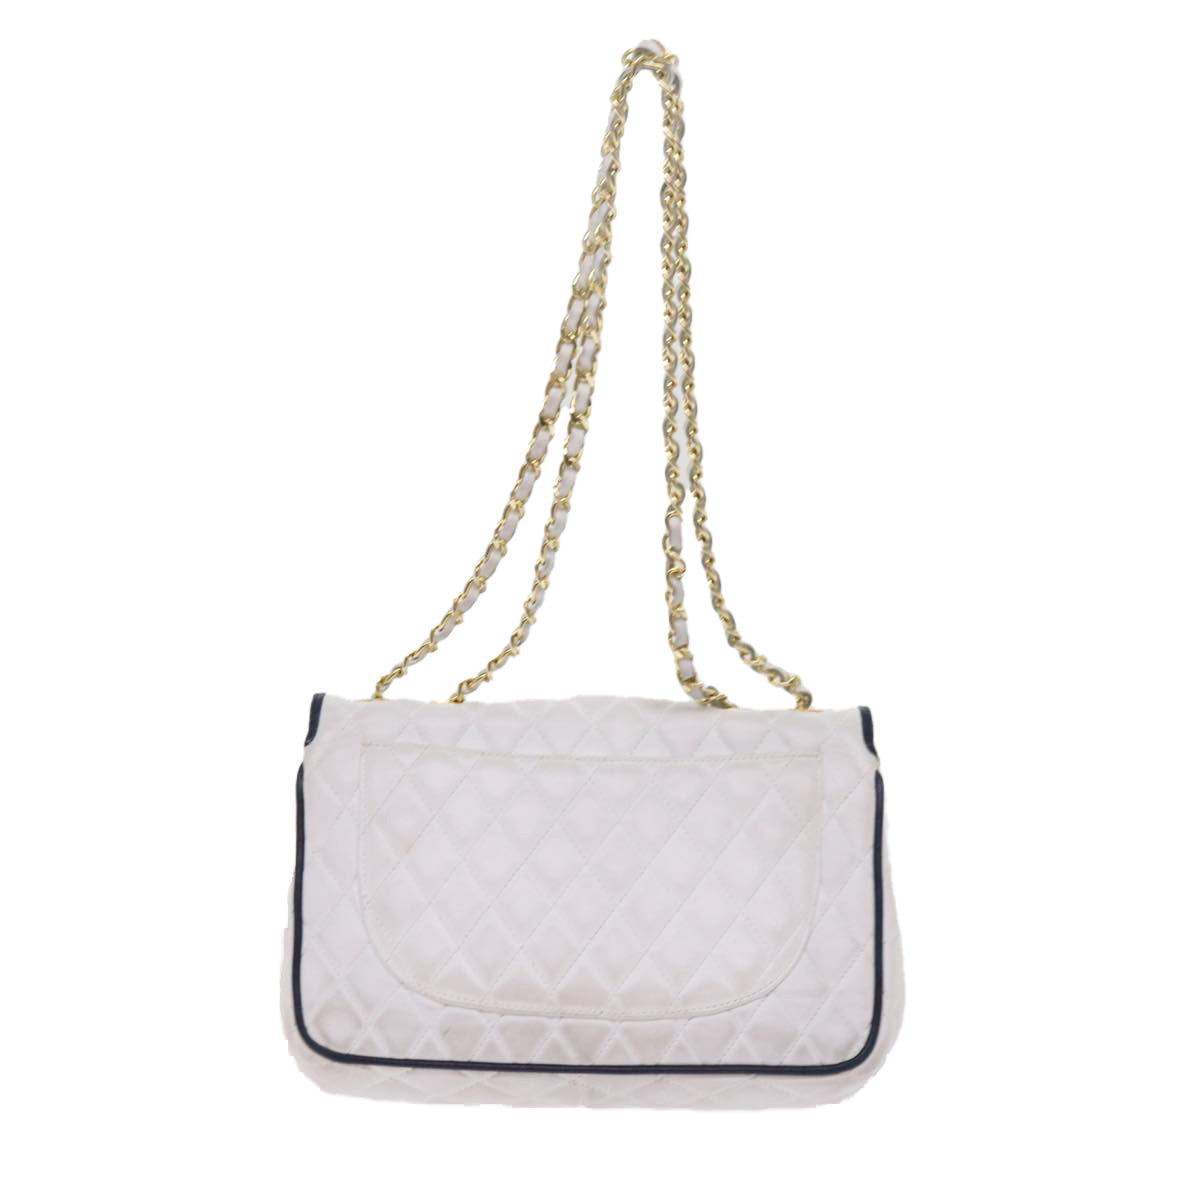 BALLY Chain Shoulder Bag Leather White Auth 62020